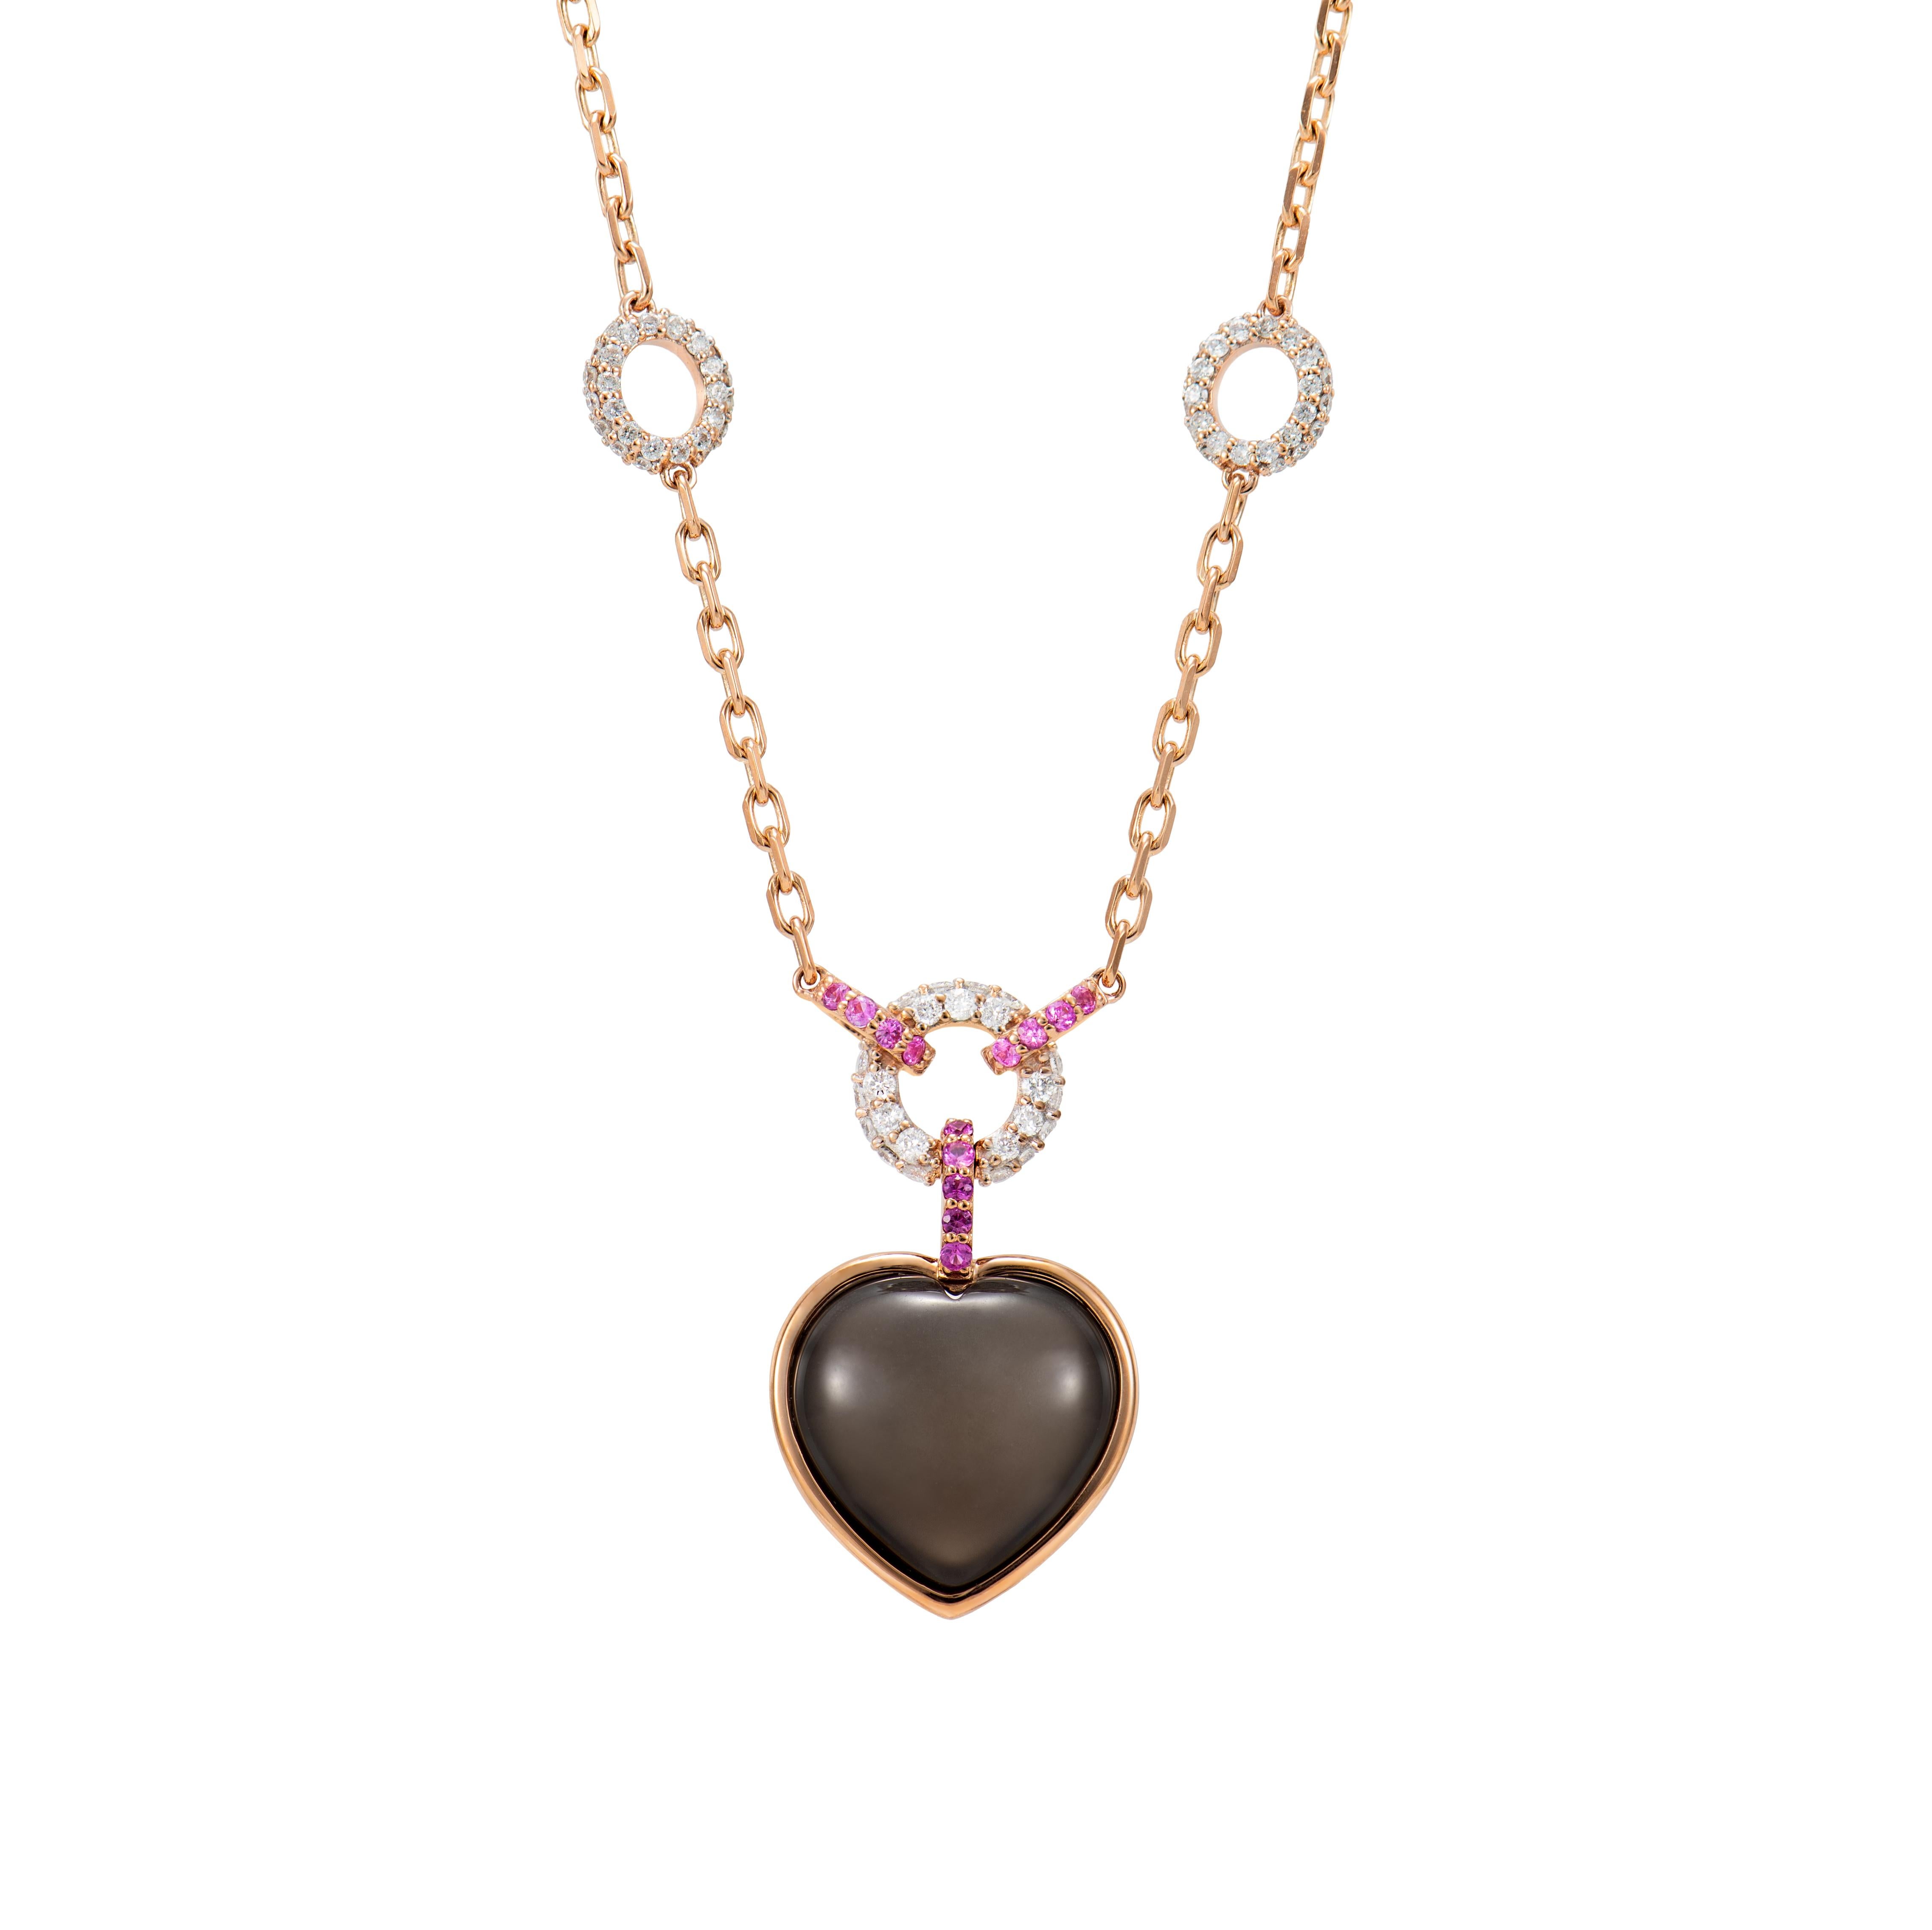 Celebrating the season of love with these delicate heart jewels! These pieces showcase beautiful gemstones with dainty accents to elevatue the beauty of the gem. 

Moonstone Necklace in 18 Karat Rose Gold with Pink Sapphire and White Diamond.

Grey